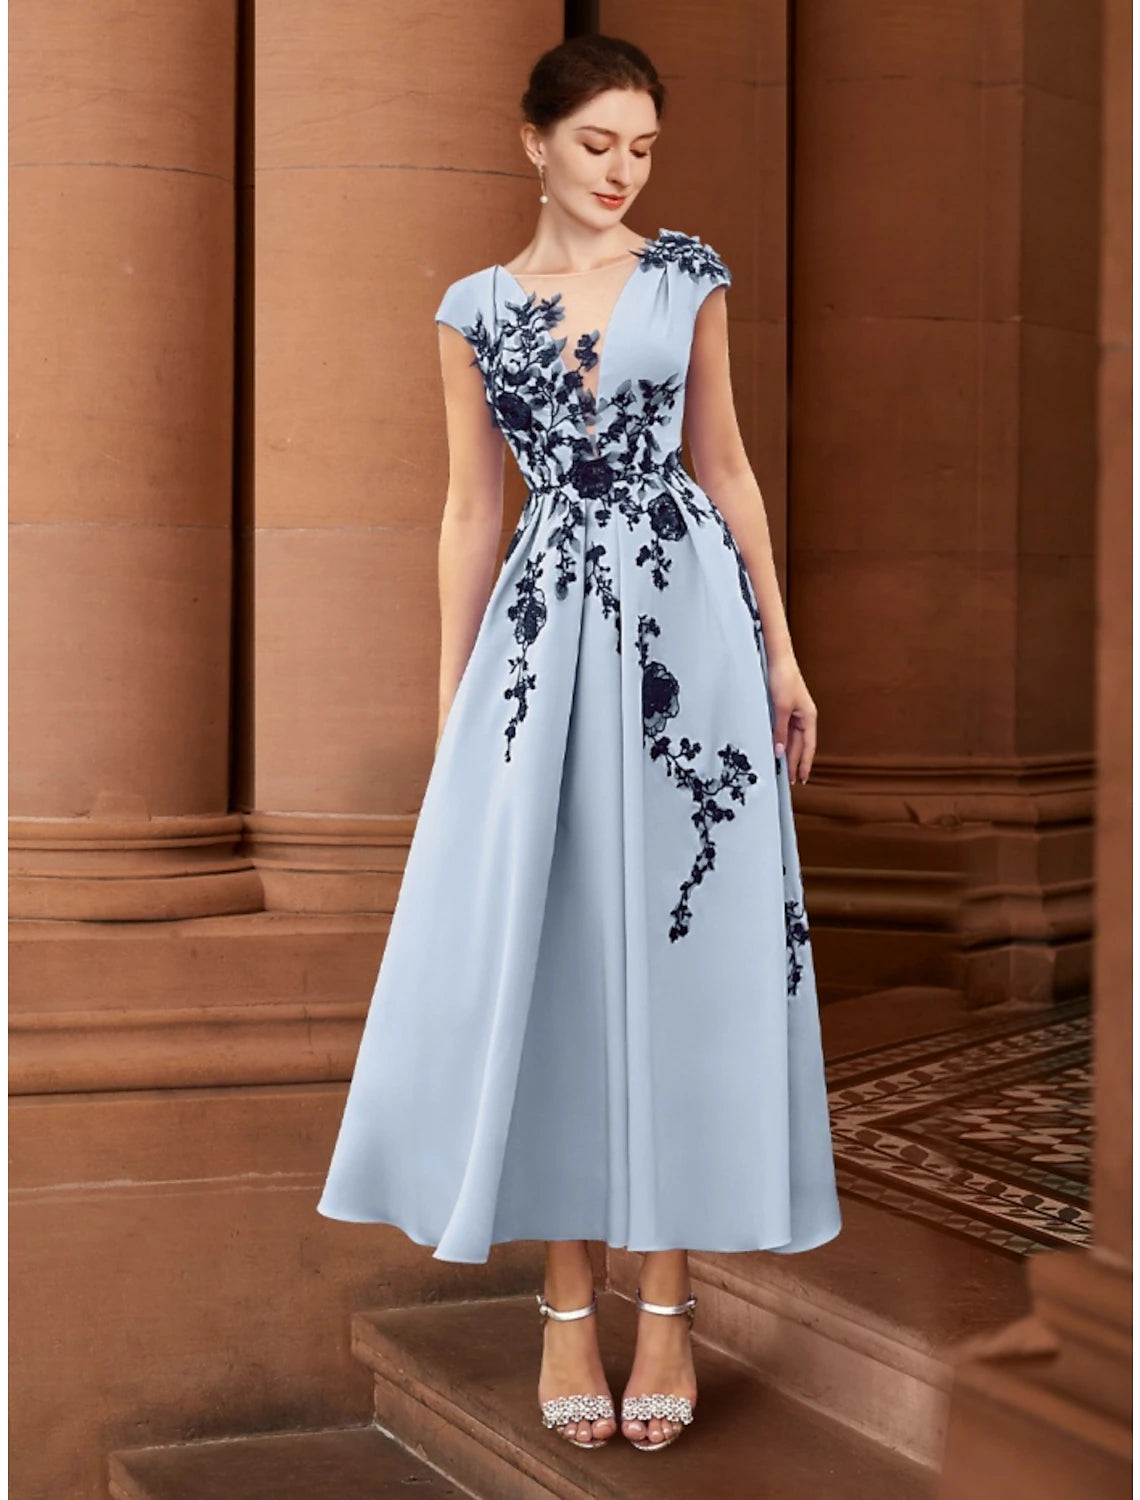 A-Line Mother of the Bride Dress Wedding Guest Elegant Illusion Neck Ankle Length Stretch Chiffon Cap Sleeve with Appliques Ruching